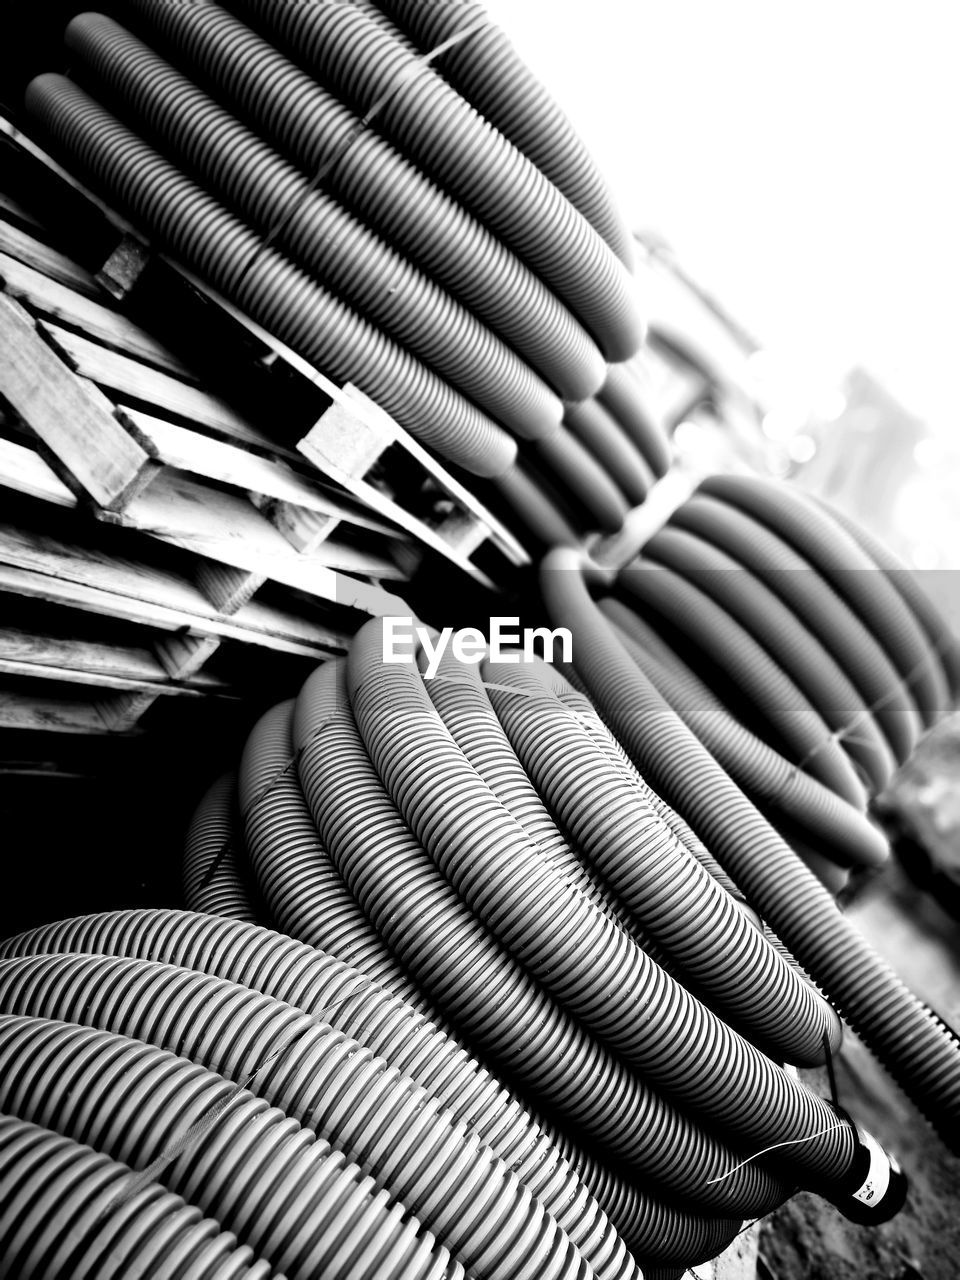 FULL FRAME SHOT OF PIPES ON STACK OF STACKED